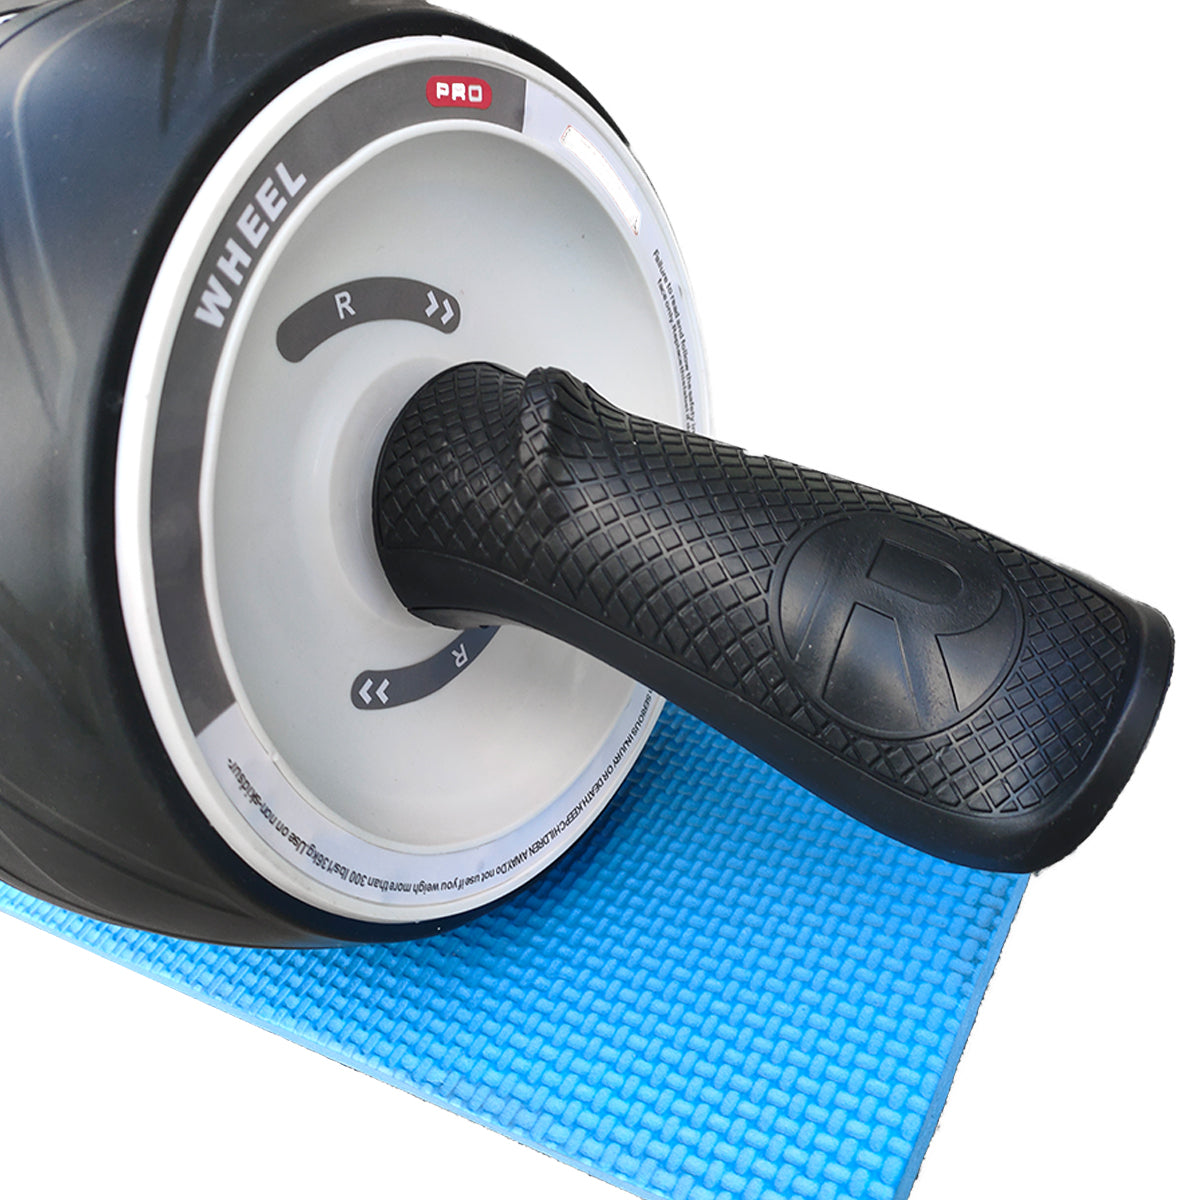 Ab Exercise Roller Wheel Pro with Knee Pad white